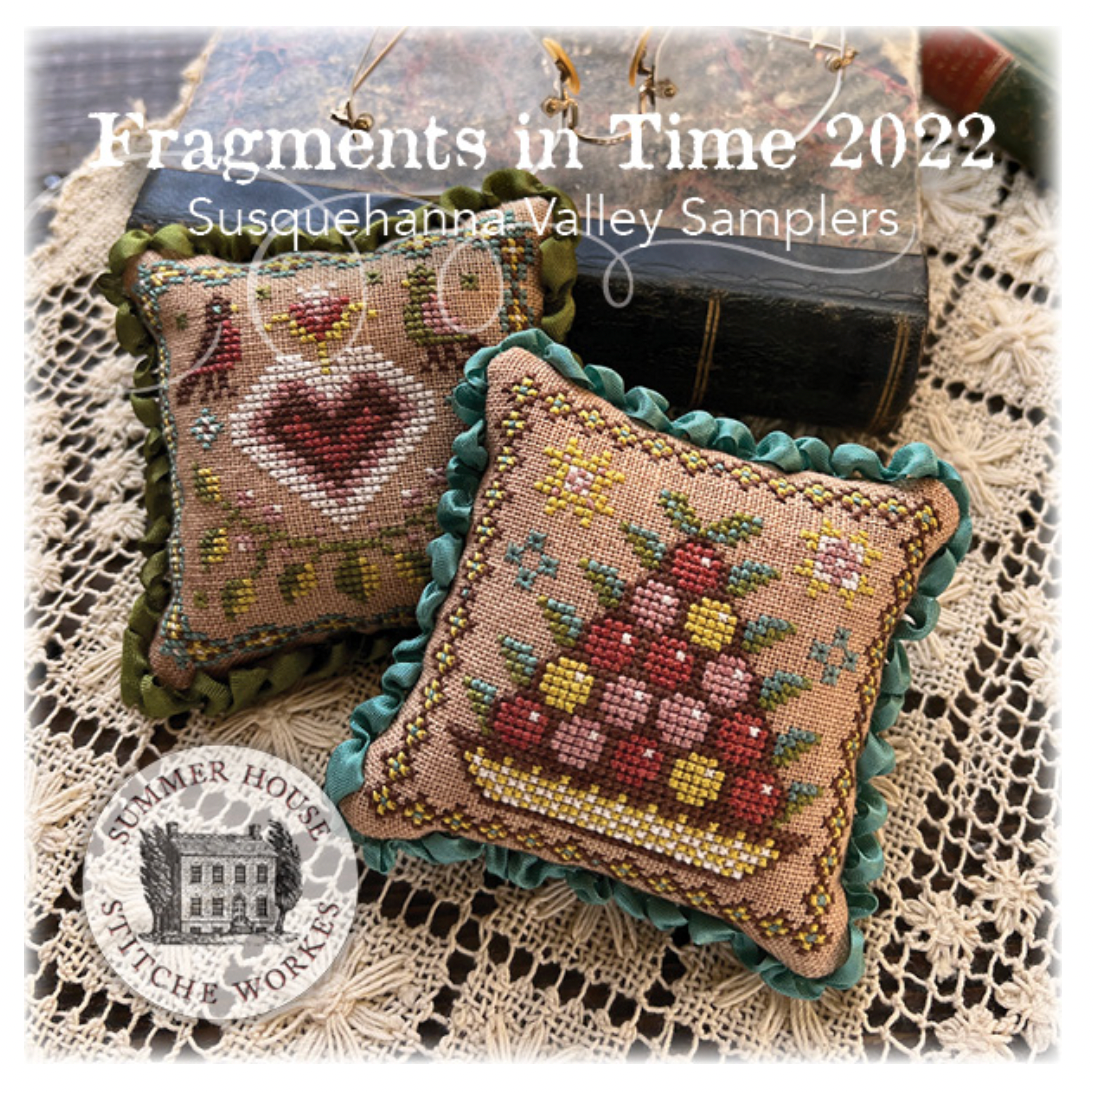 Summer House Stitche Workes ~ Fragments in Time 2022 #1